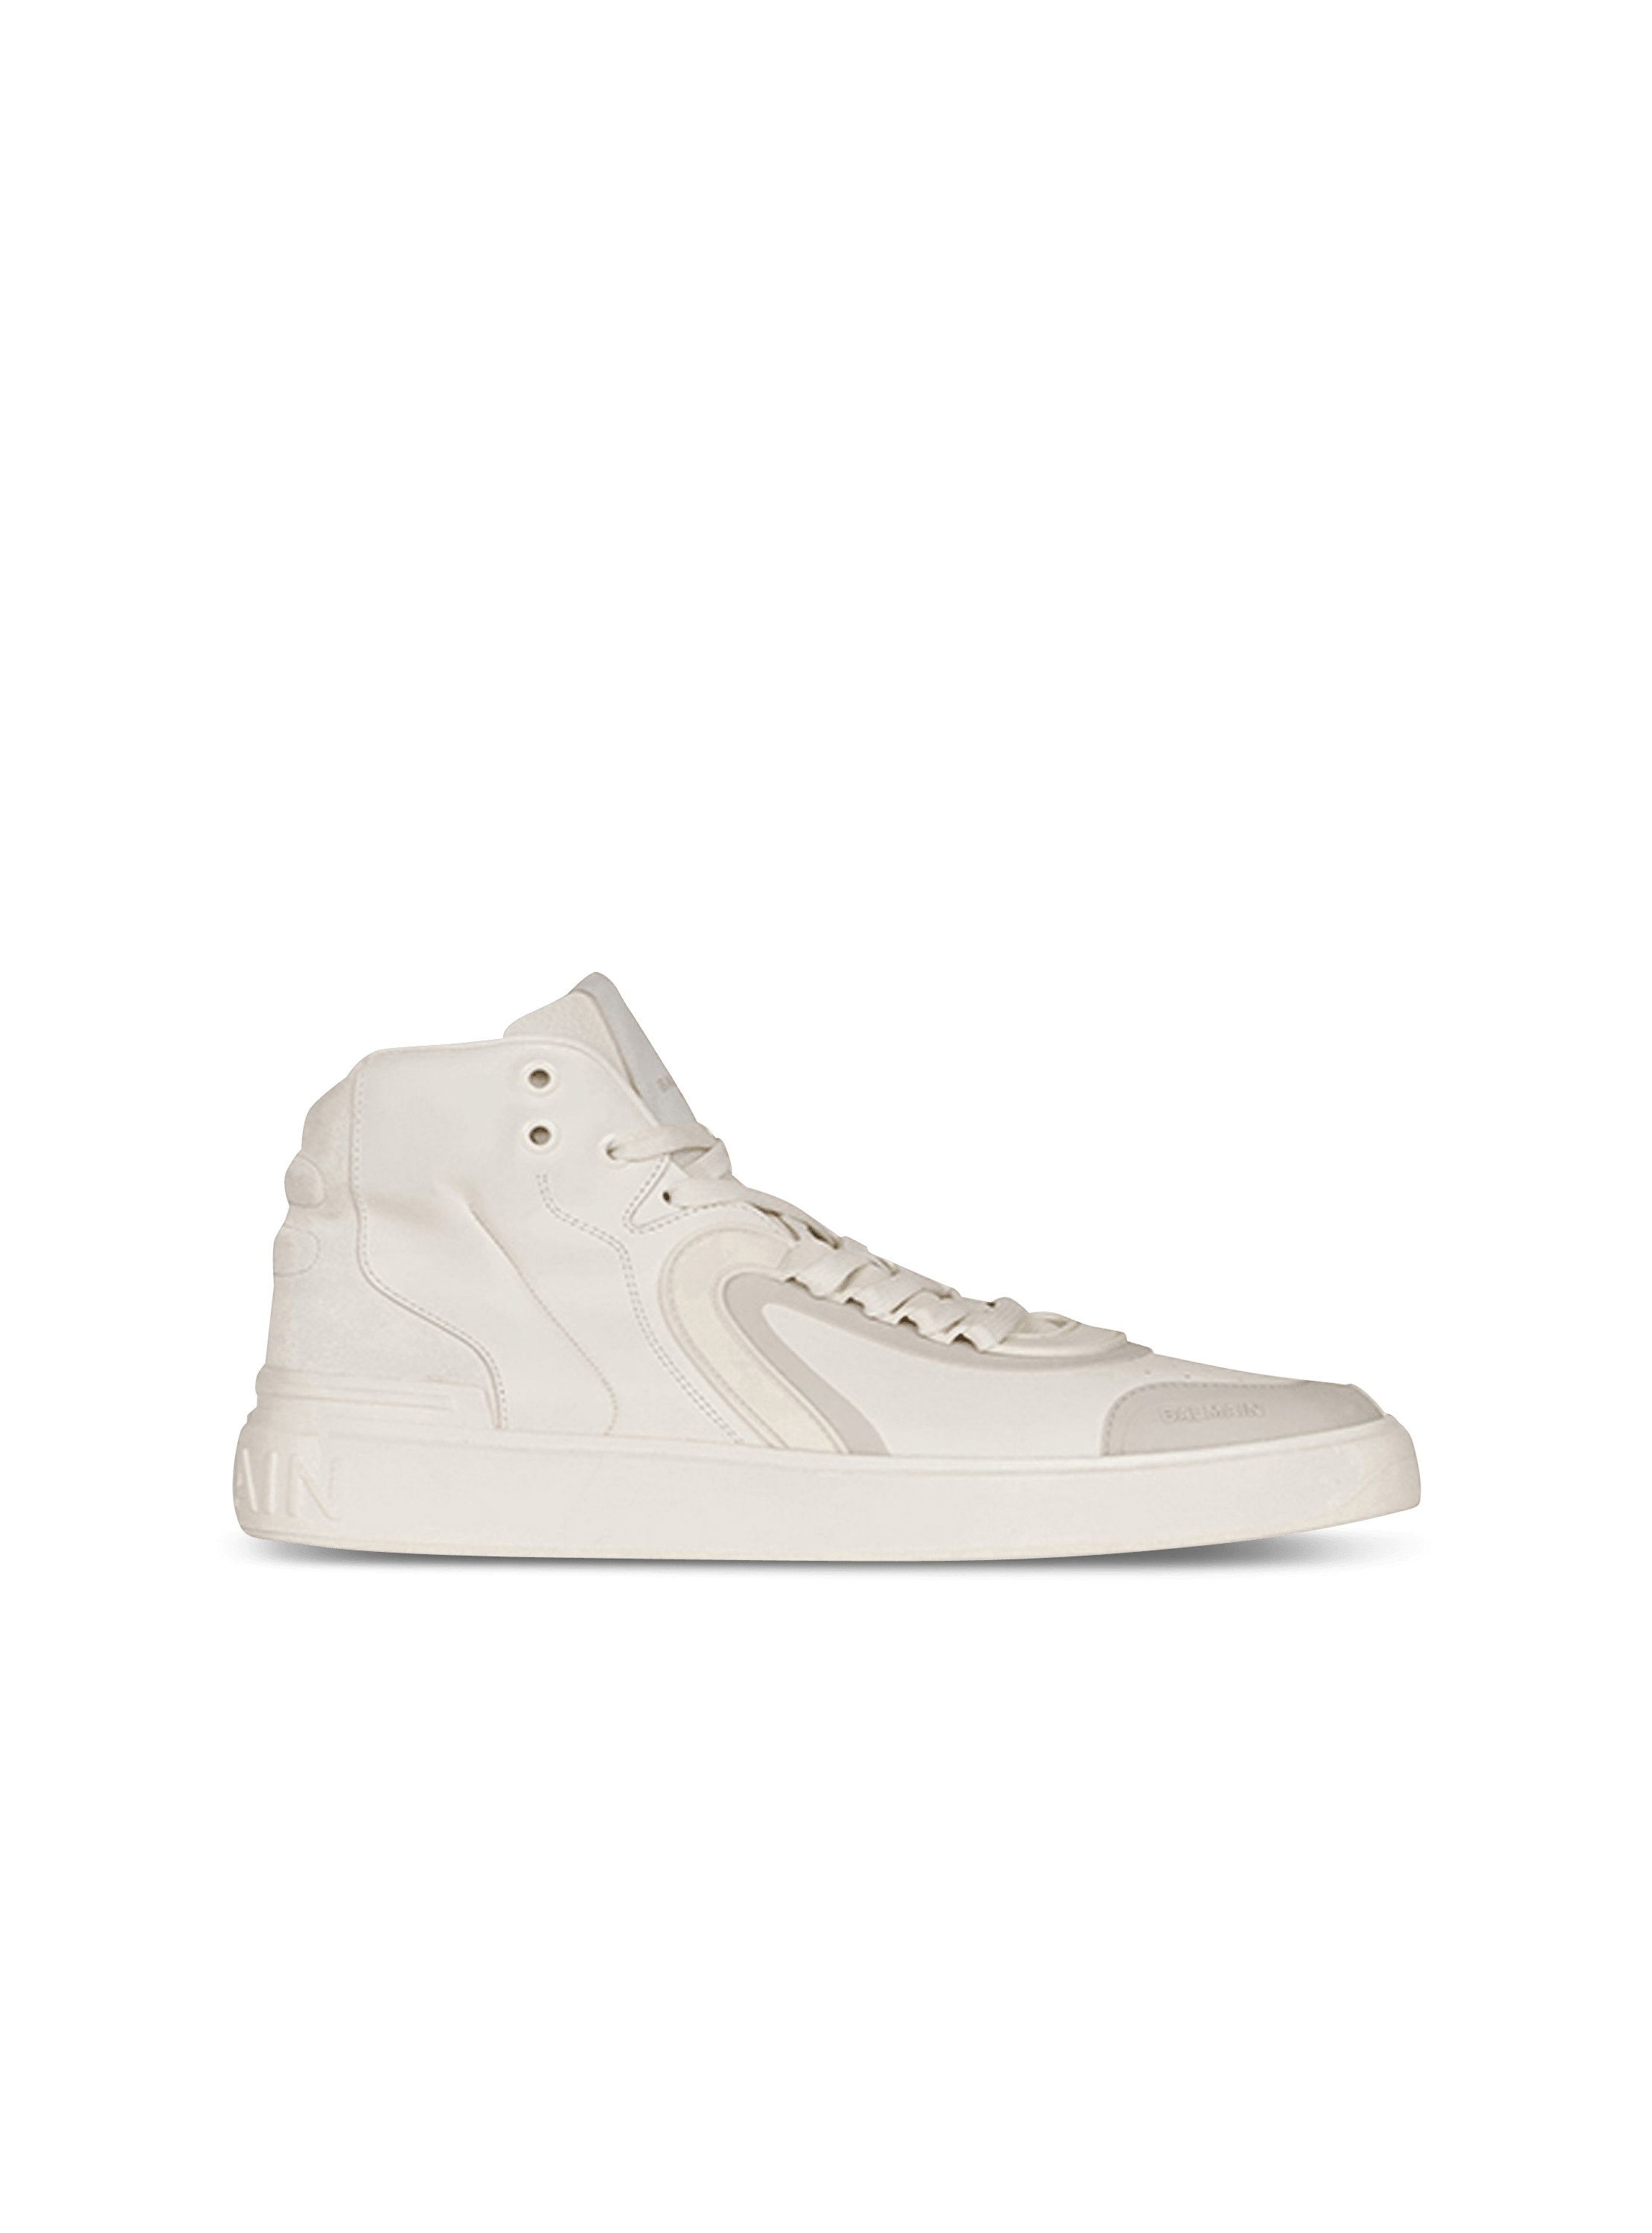 Leather and suede B-Skate high-top sneakers, white, hi-res